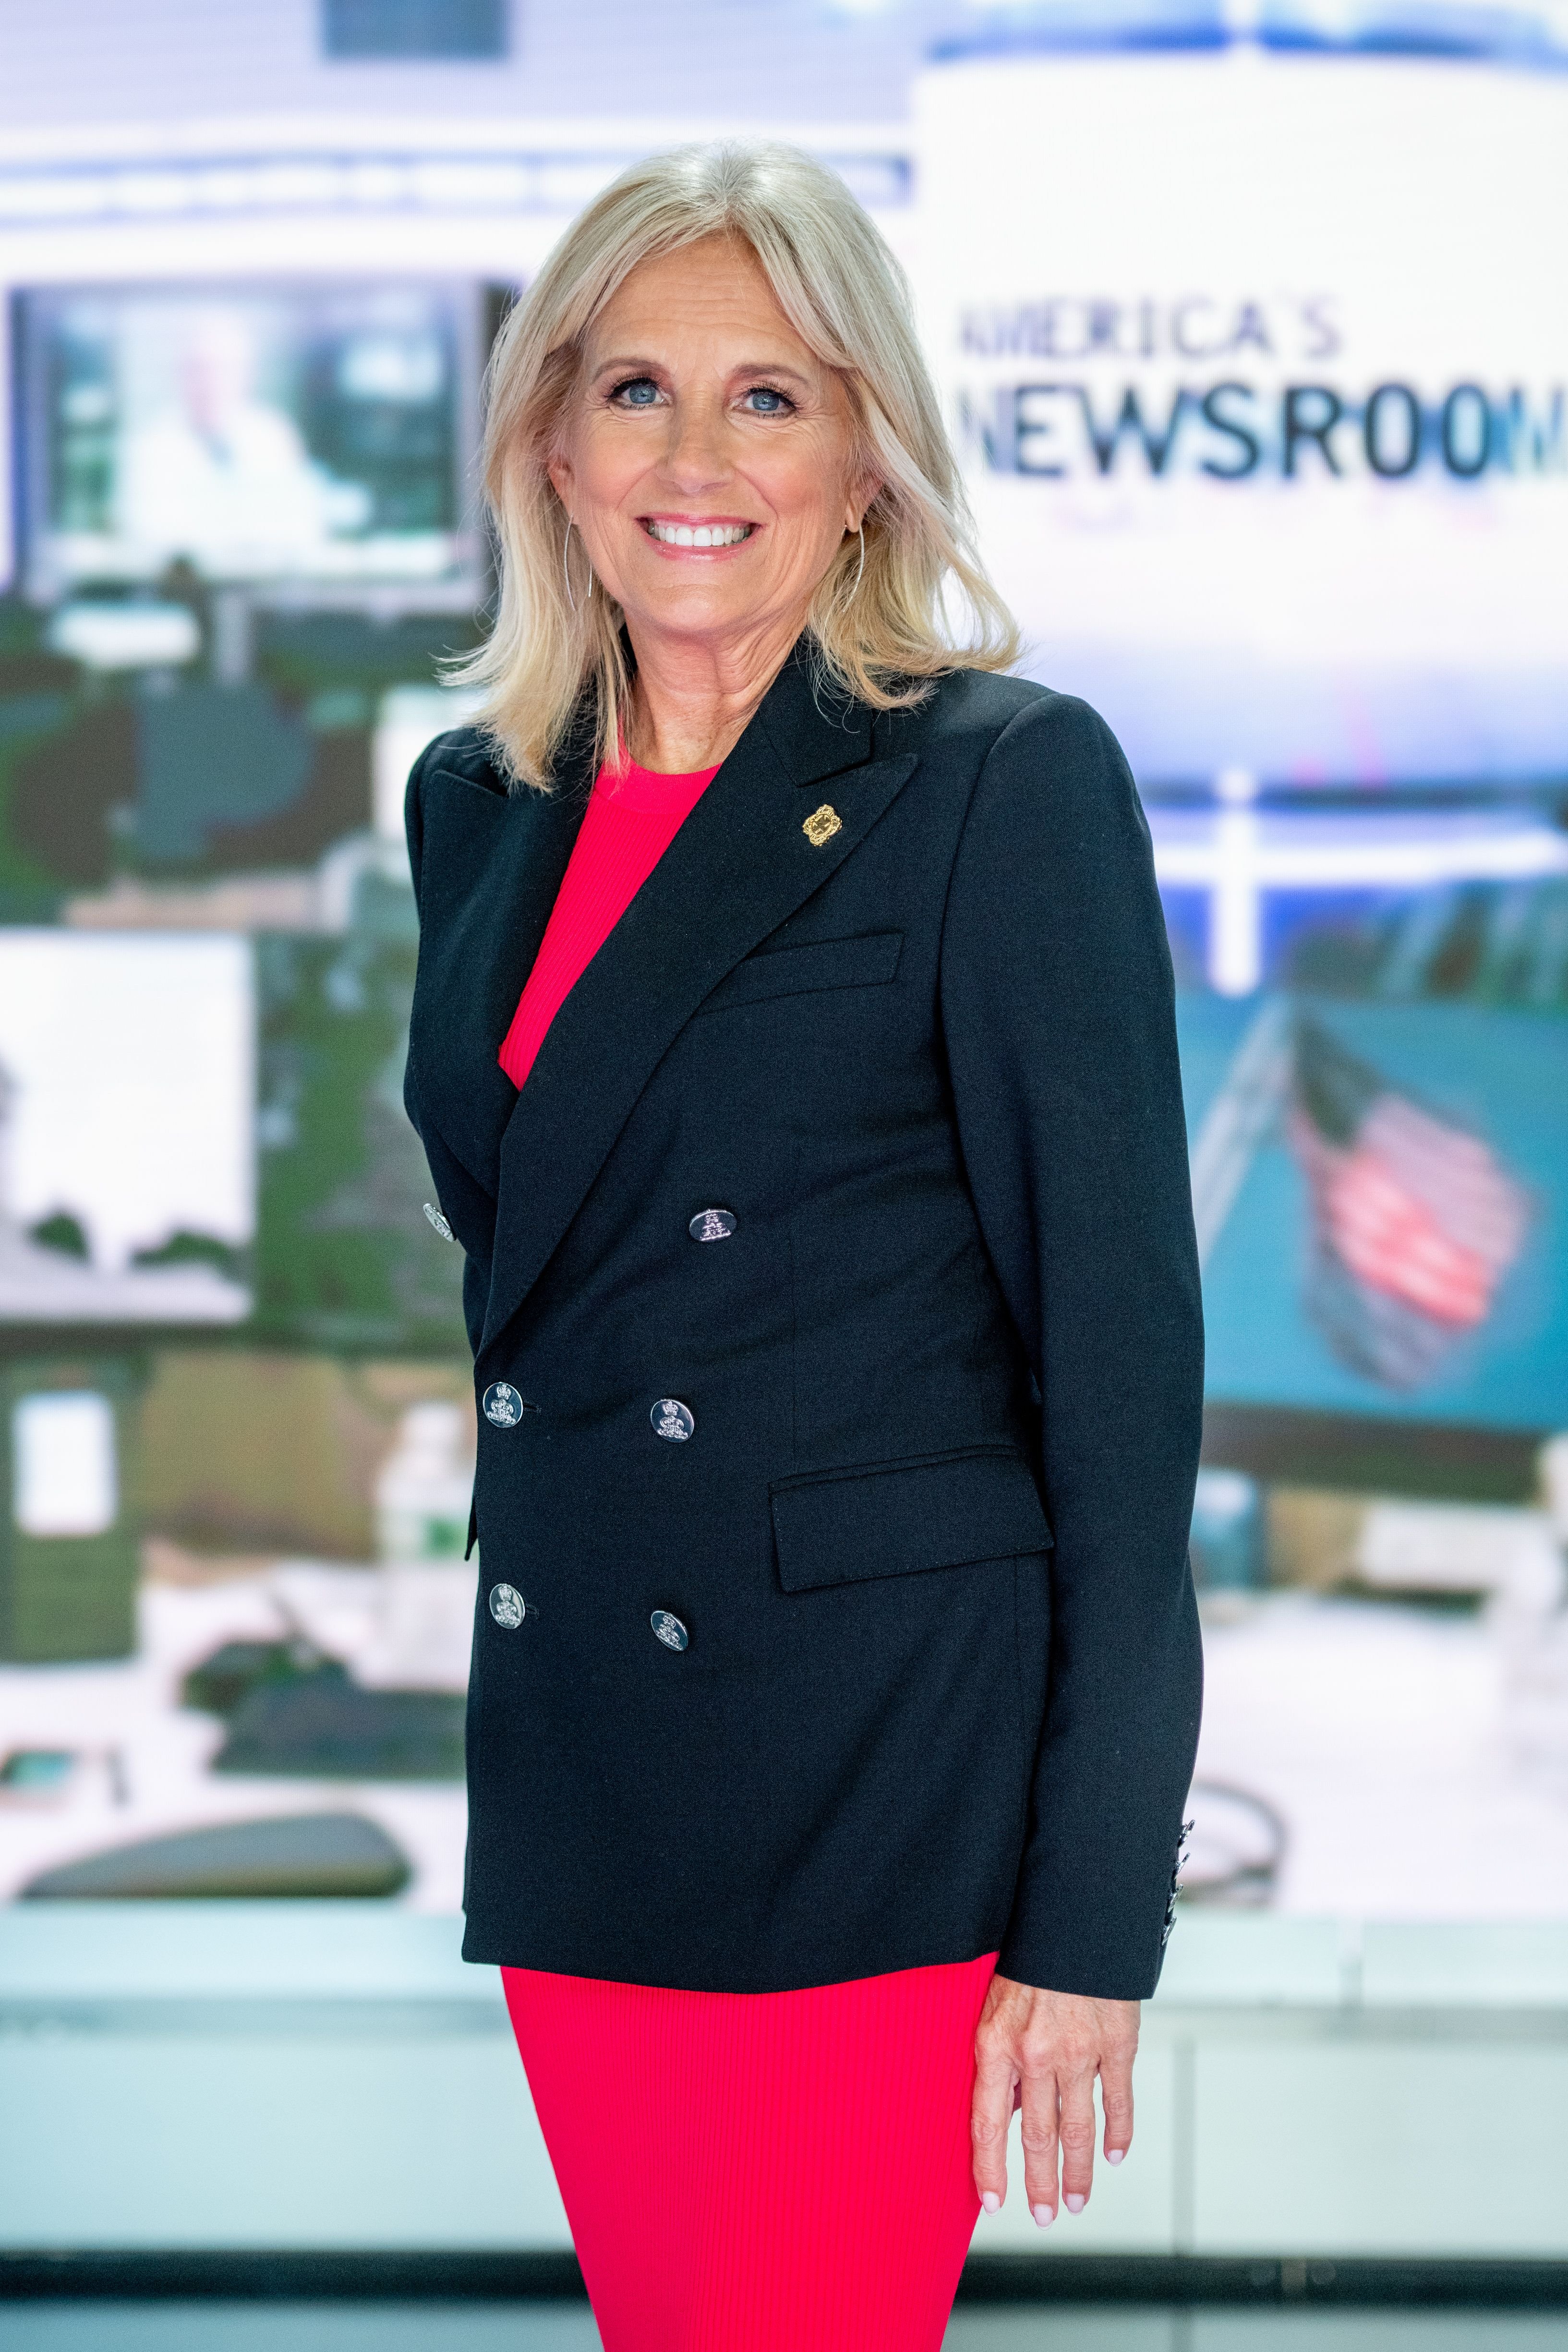 Dr. Jill Biden visits "America's Newsroom" at Fox News Channel Studios on September 6, 2018 | Photo: Getty Images